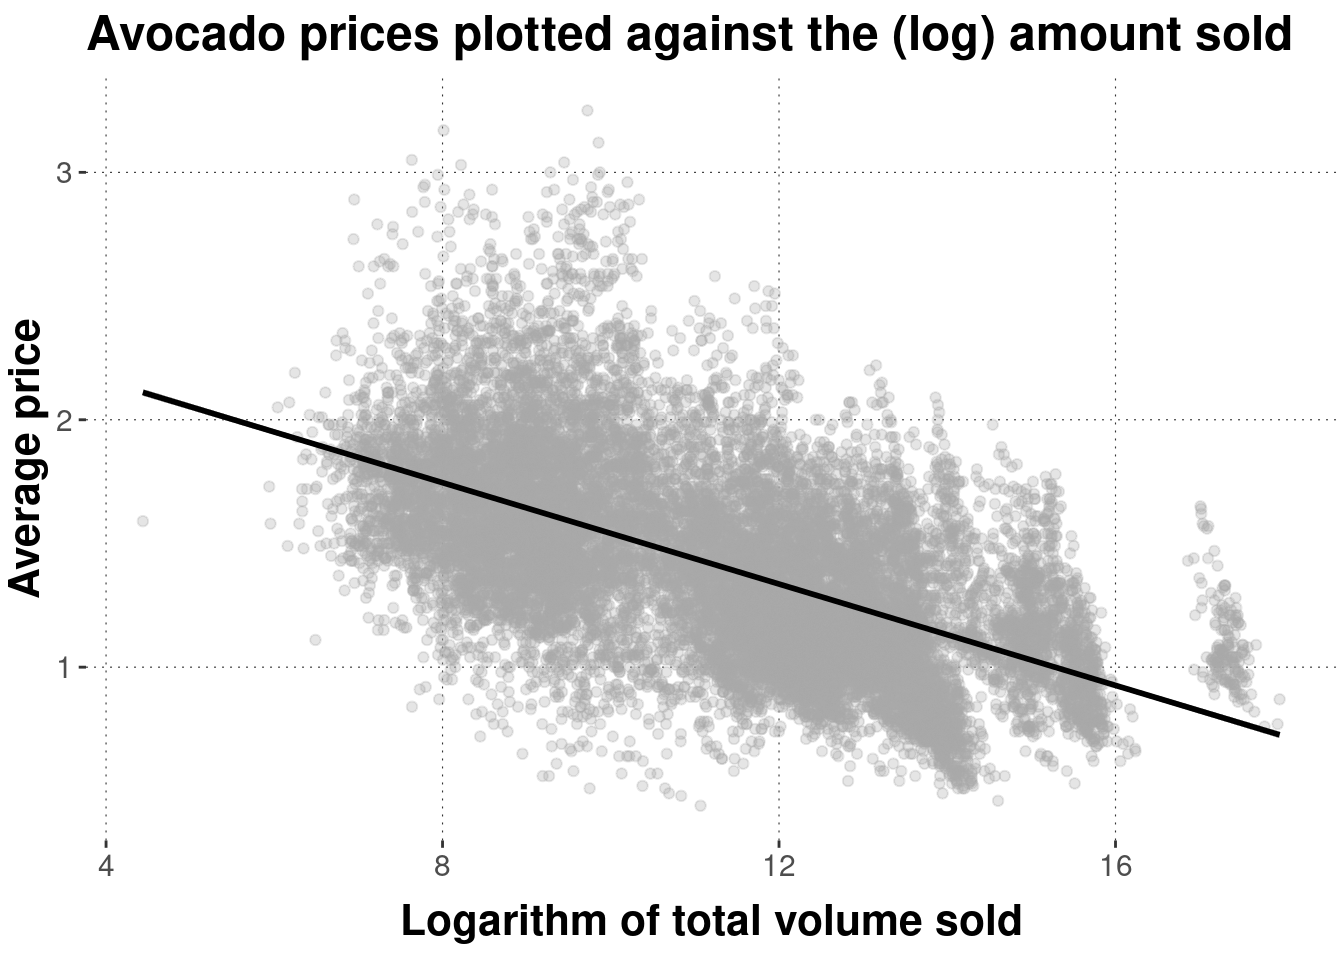 Scatter plot of avocado prices, plotted against (logarithms of) the total amount sold. The black line is a linear regression line indicating the (negative) correlation between these measures (more on this later).